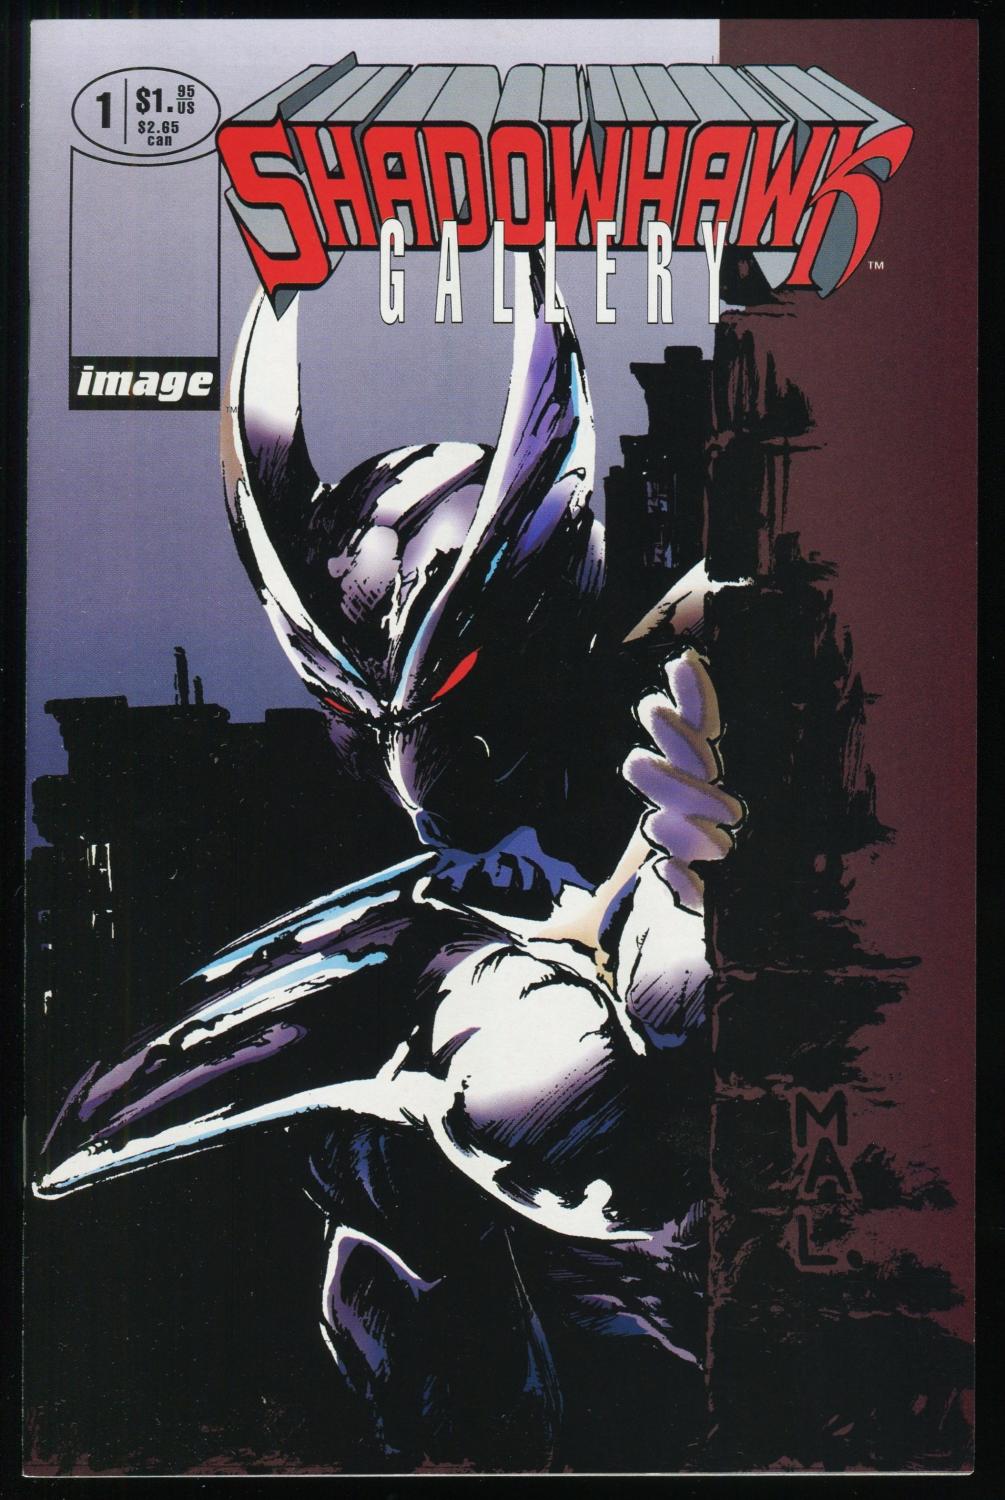 Everything You Need to Know About the Shadowhawk